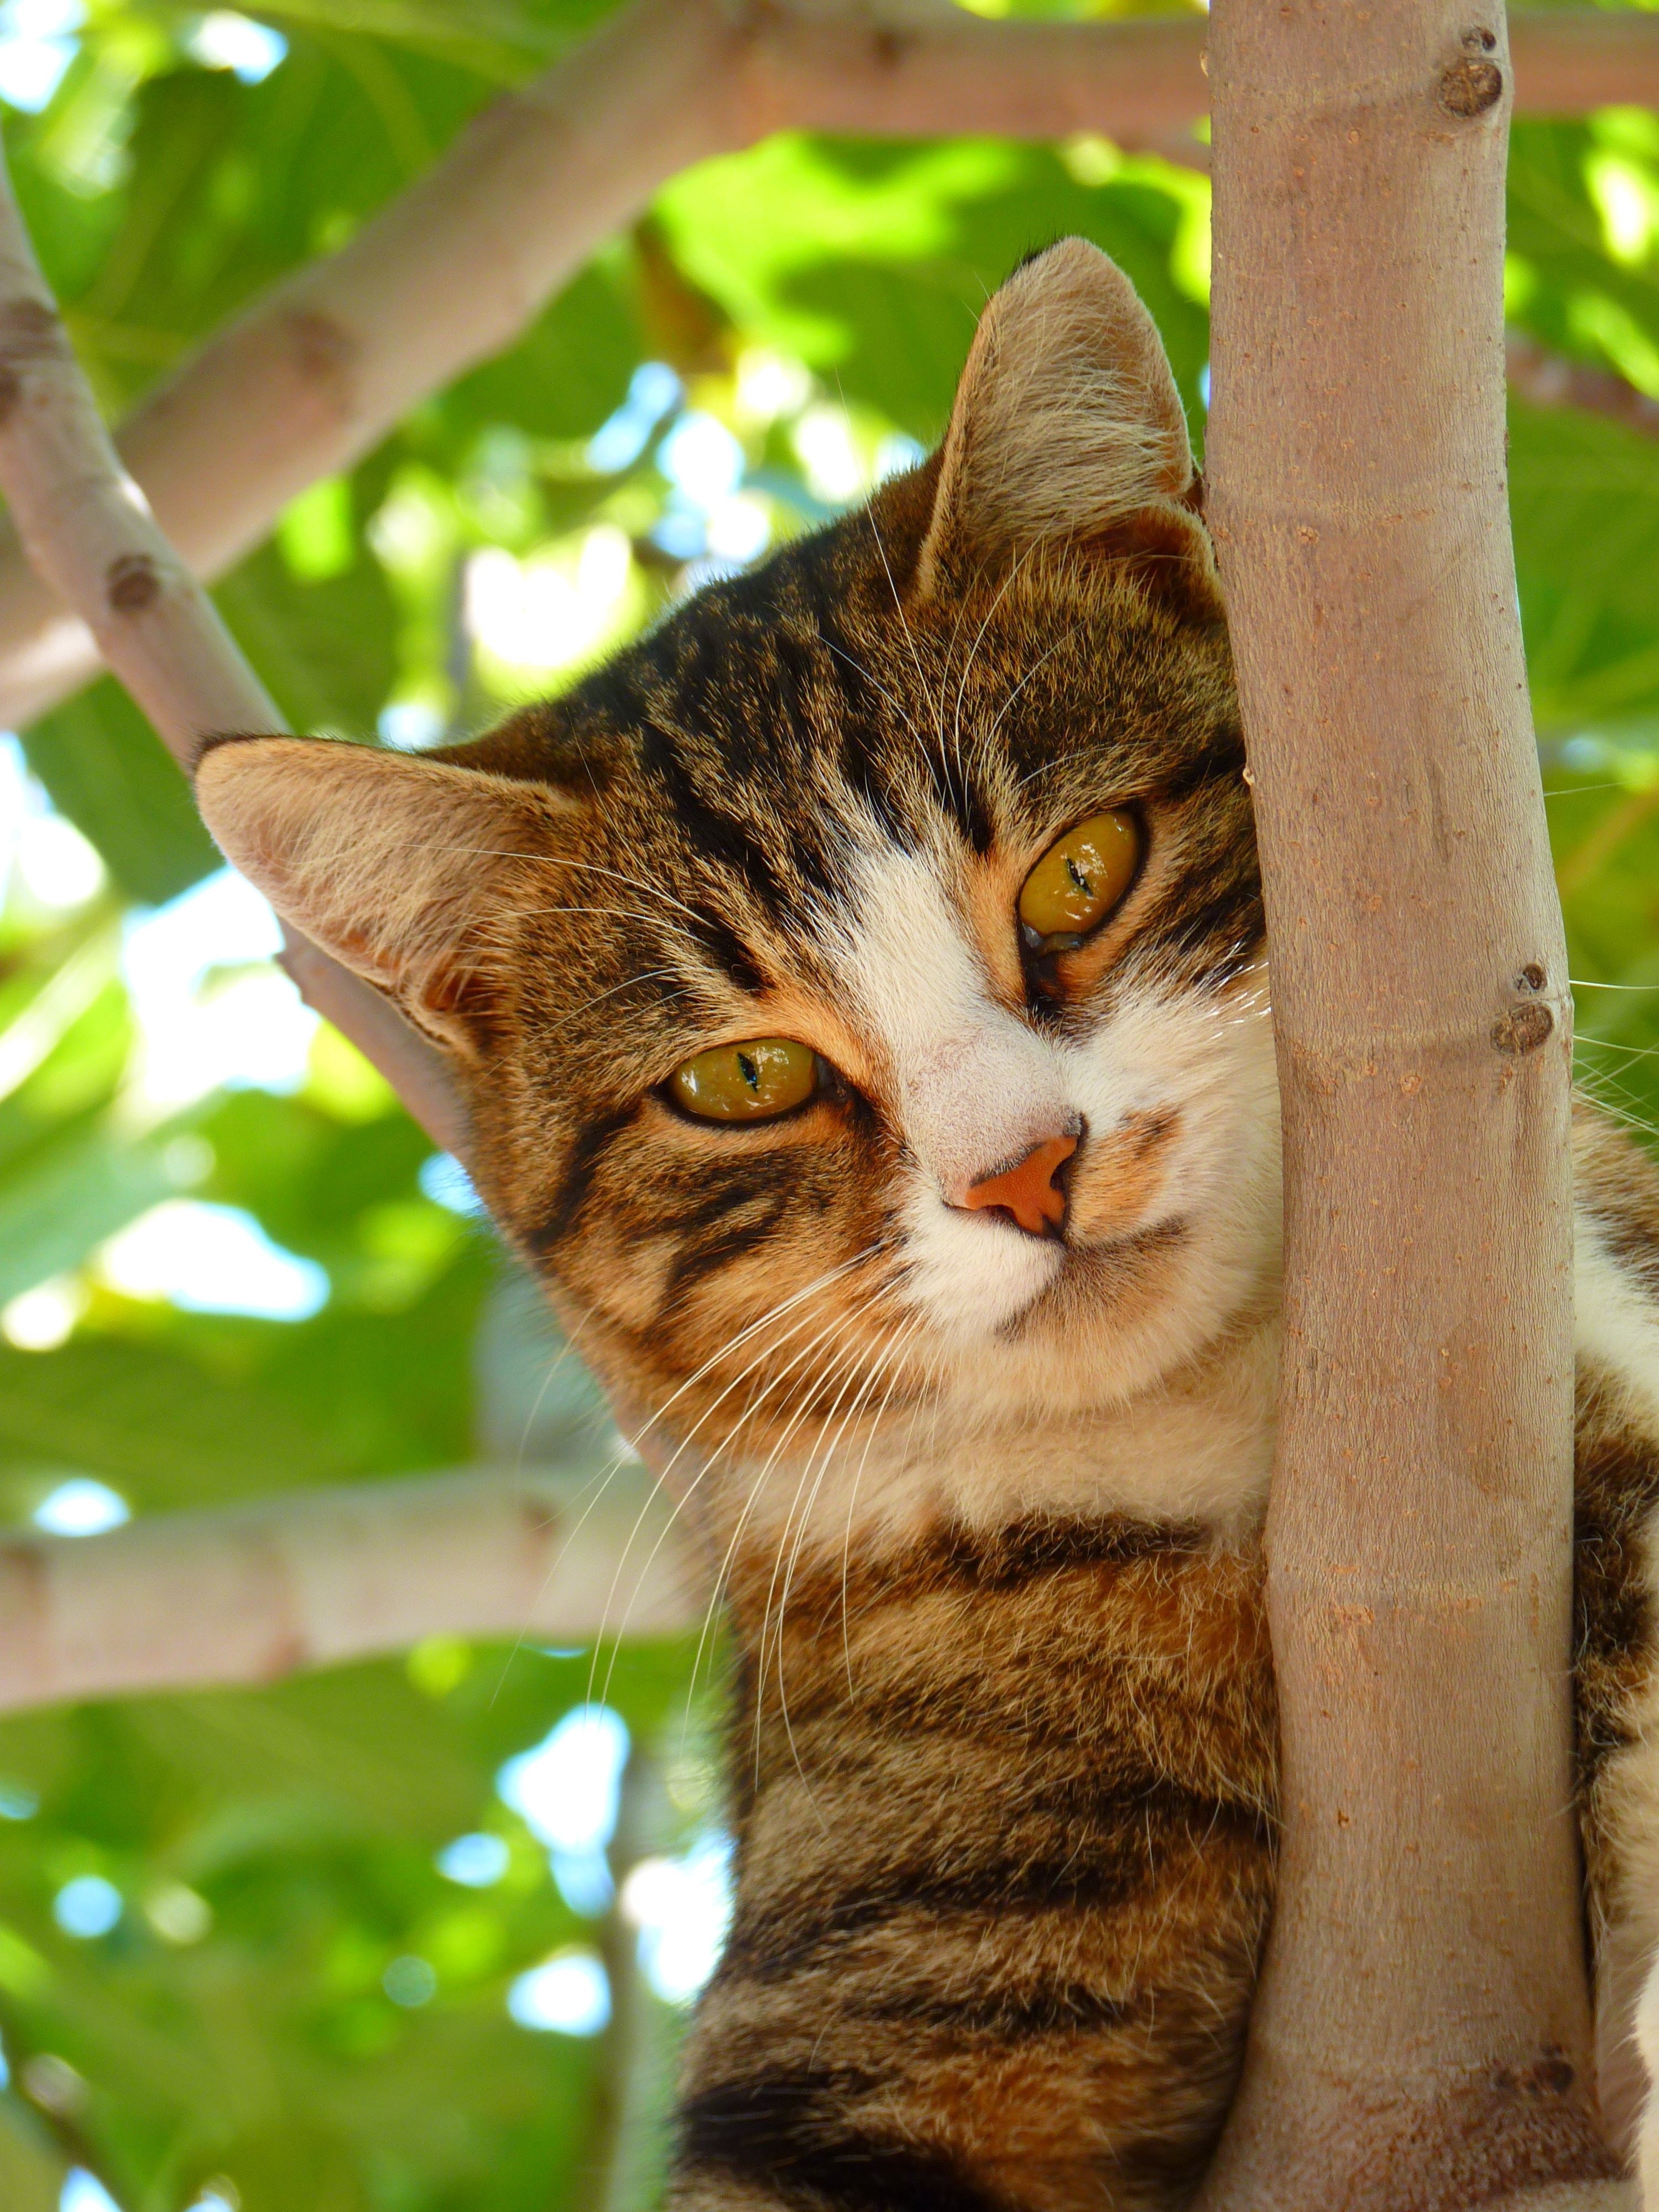 Cat on tree branch during daytime focus photography